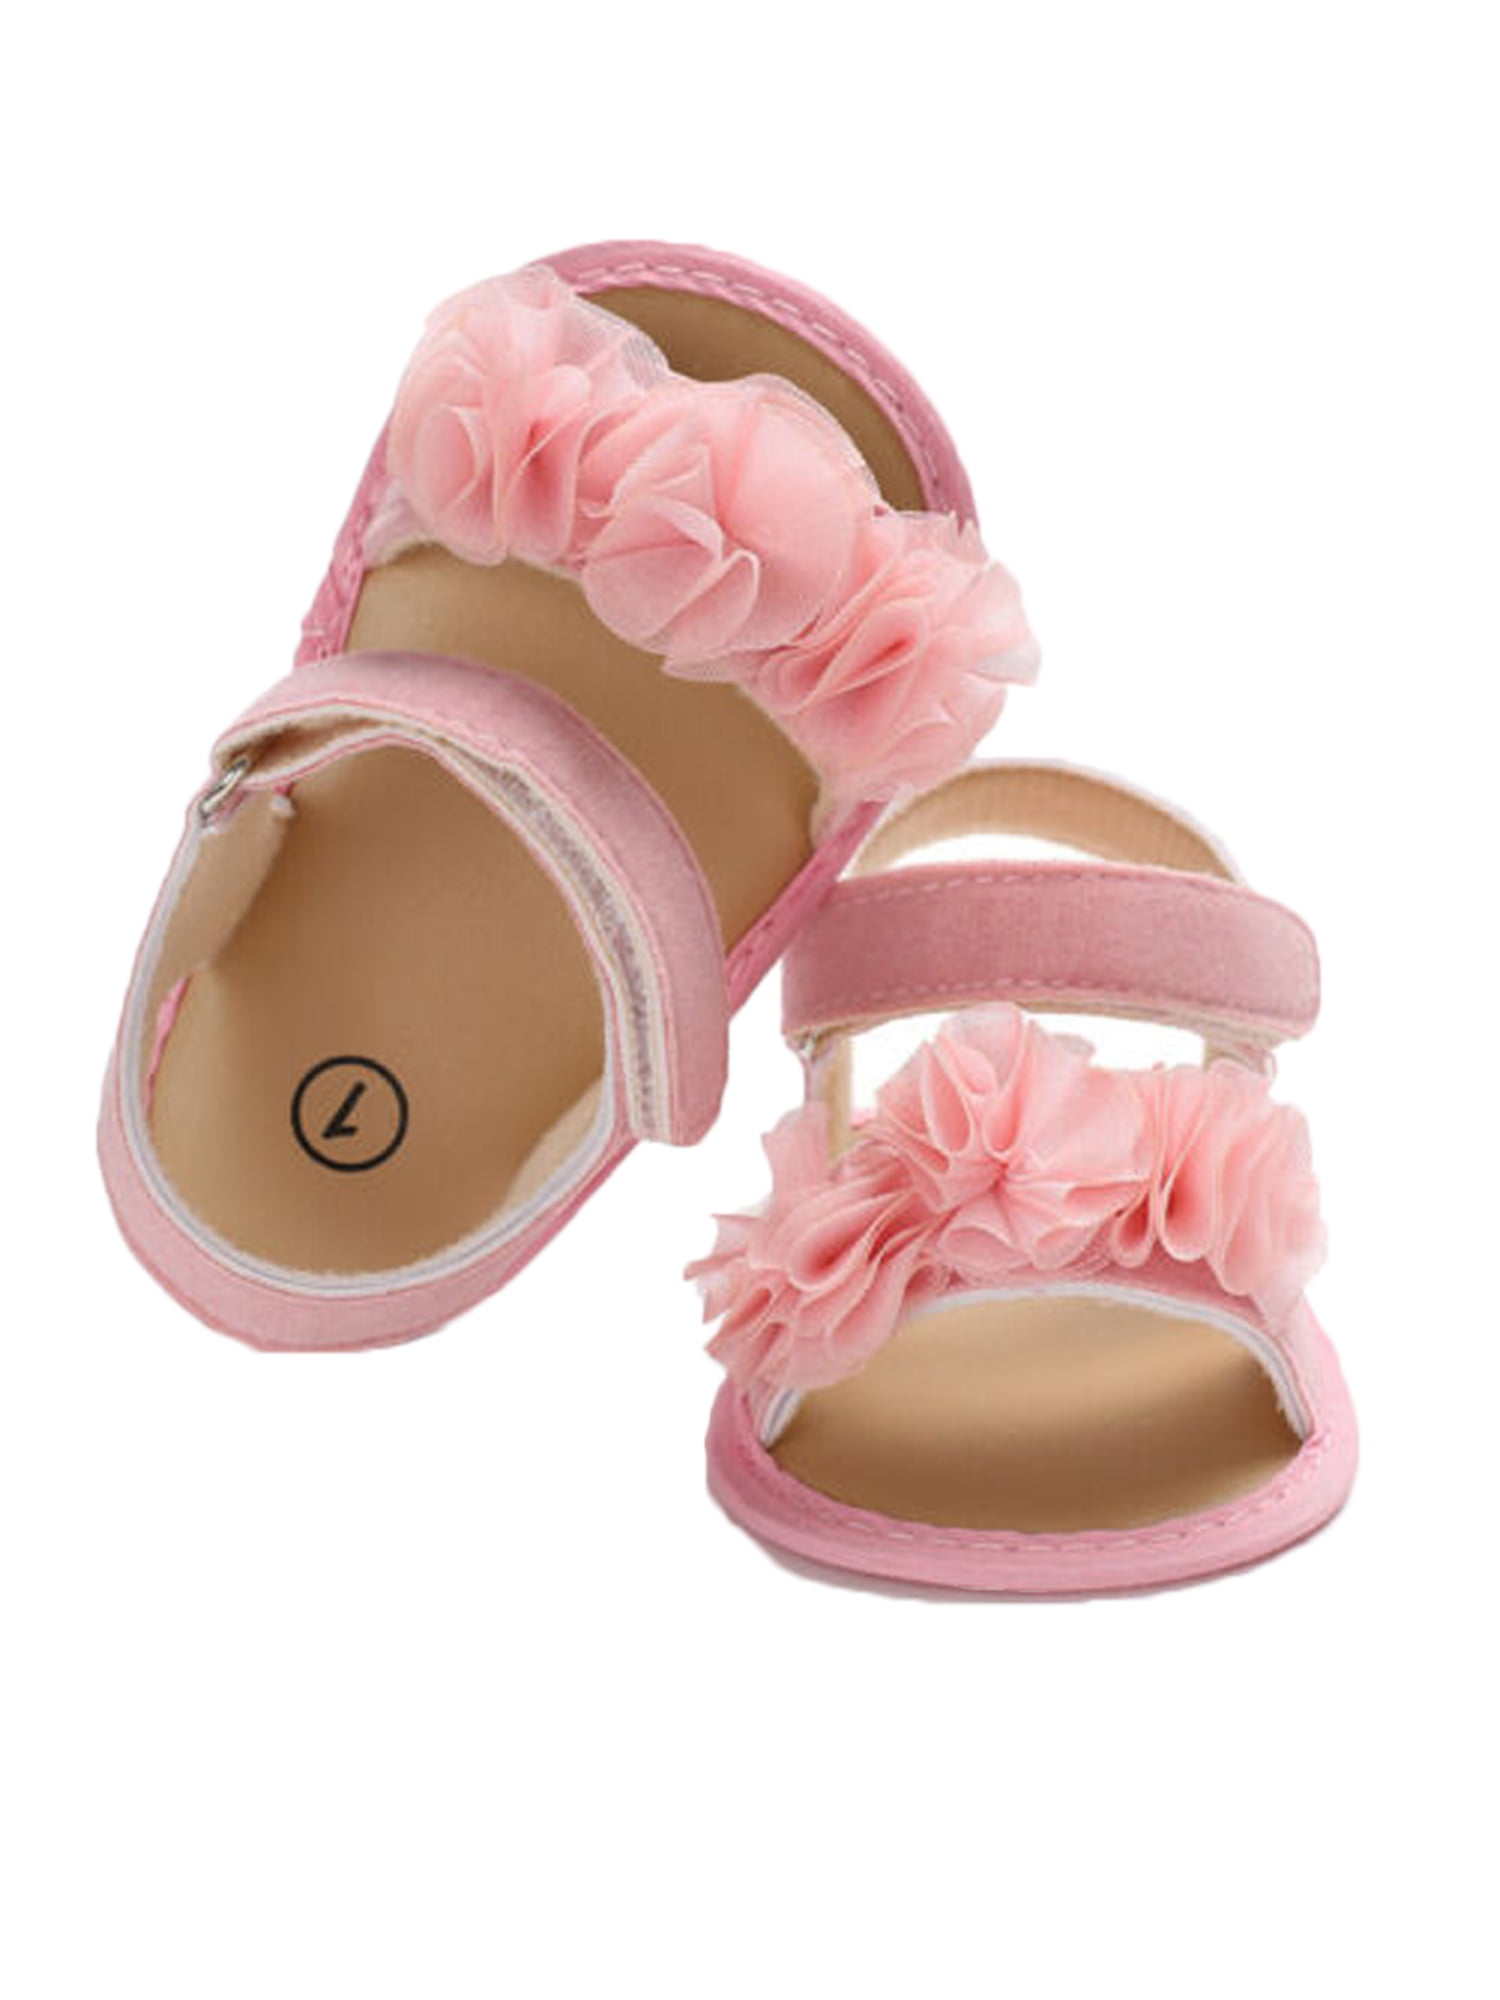 Baby Girl Crib Shoes,Flower Soft Sole Newborn Anti-slip Toddler Sandals Shoes 0~6 Month, Pink 